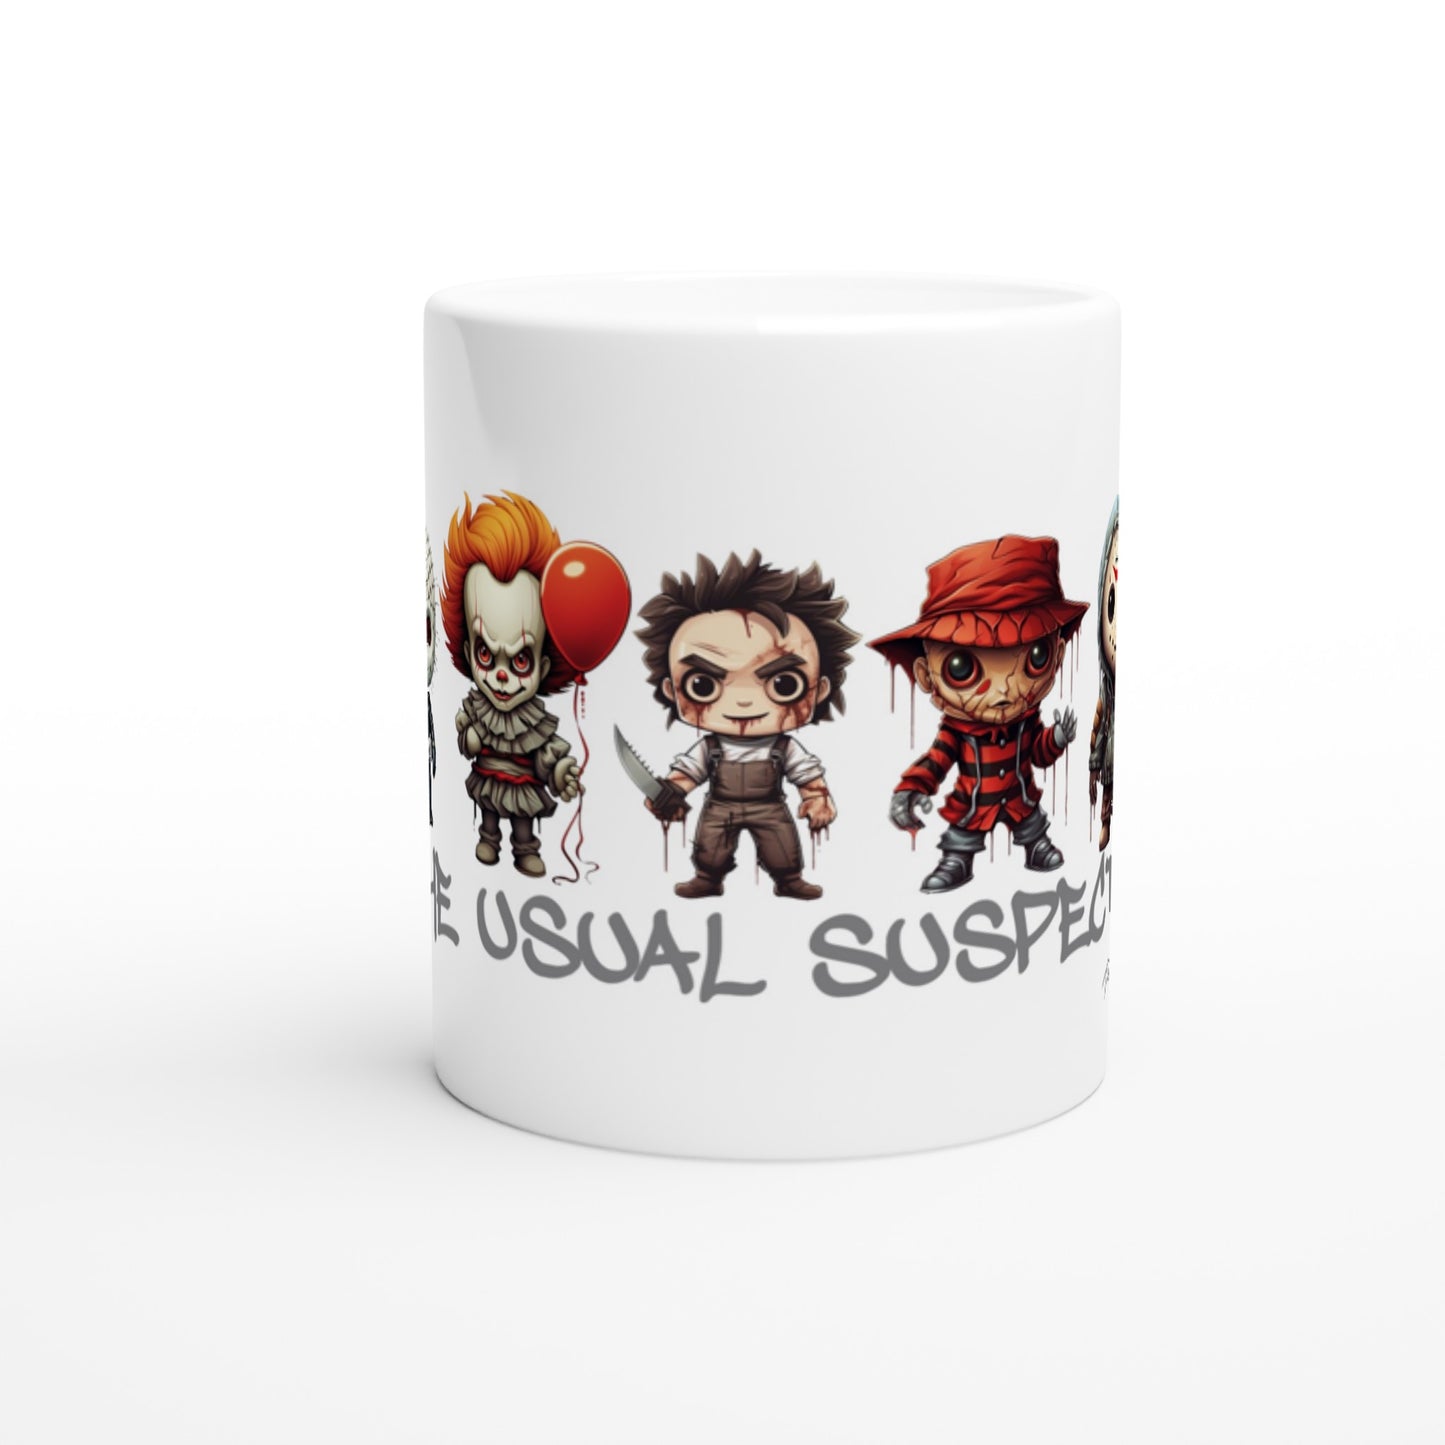 Spook Up Your Mornings with our Horror's Usual Suspects 11oz Ceramic Mug!